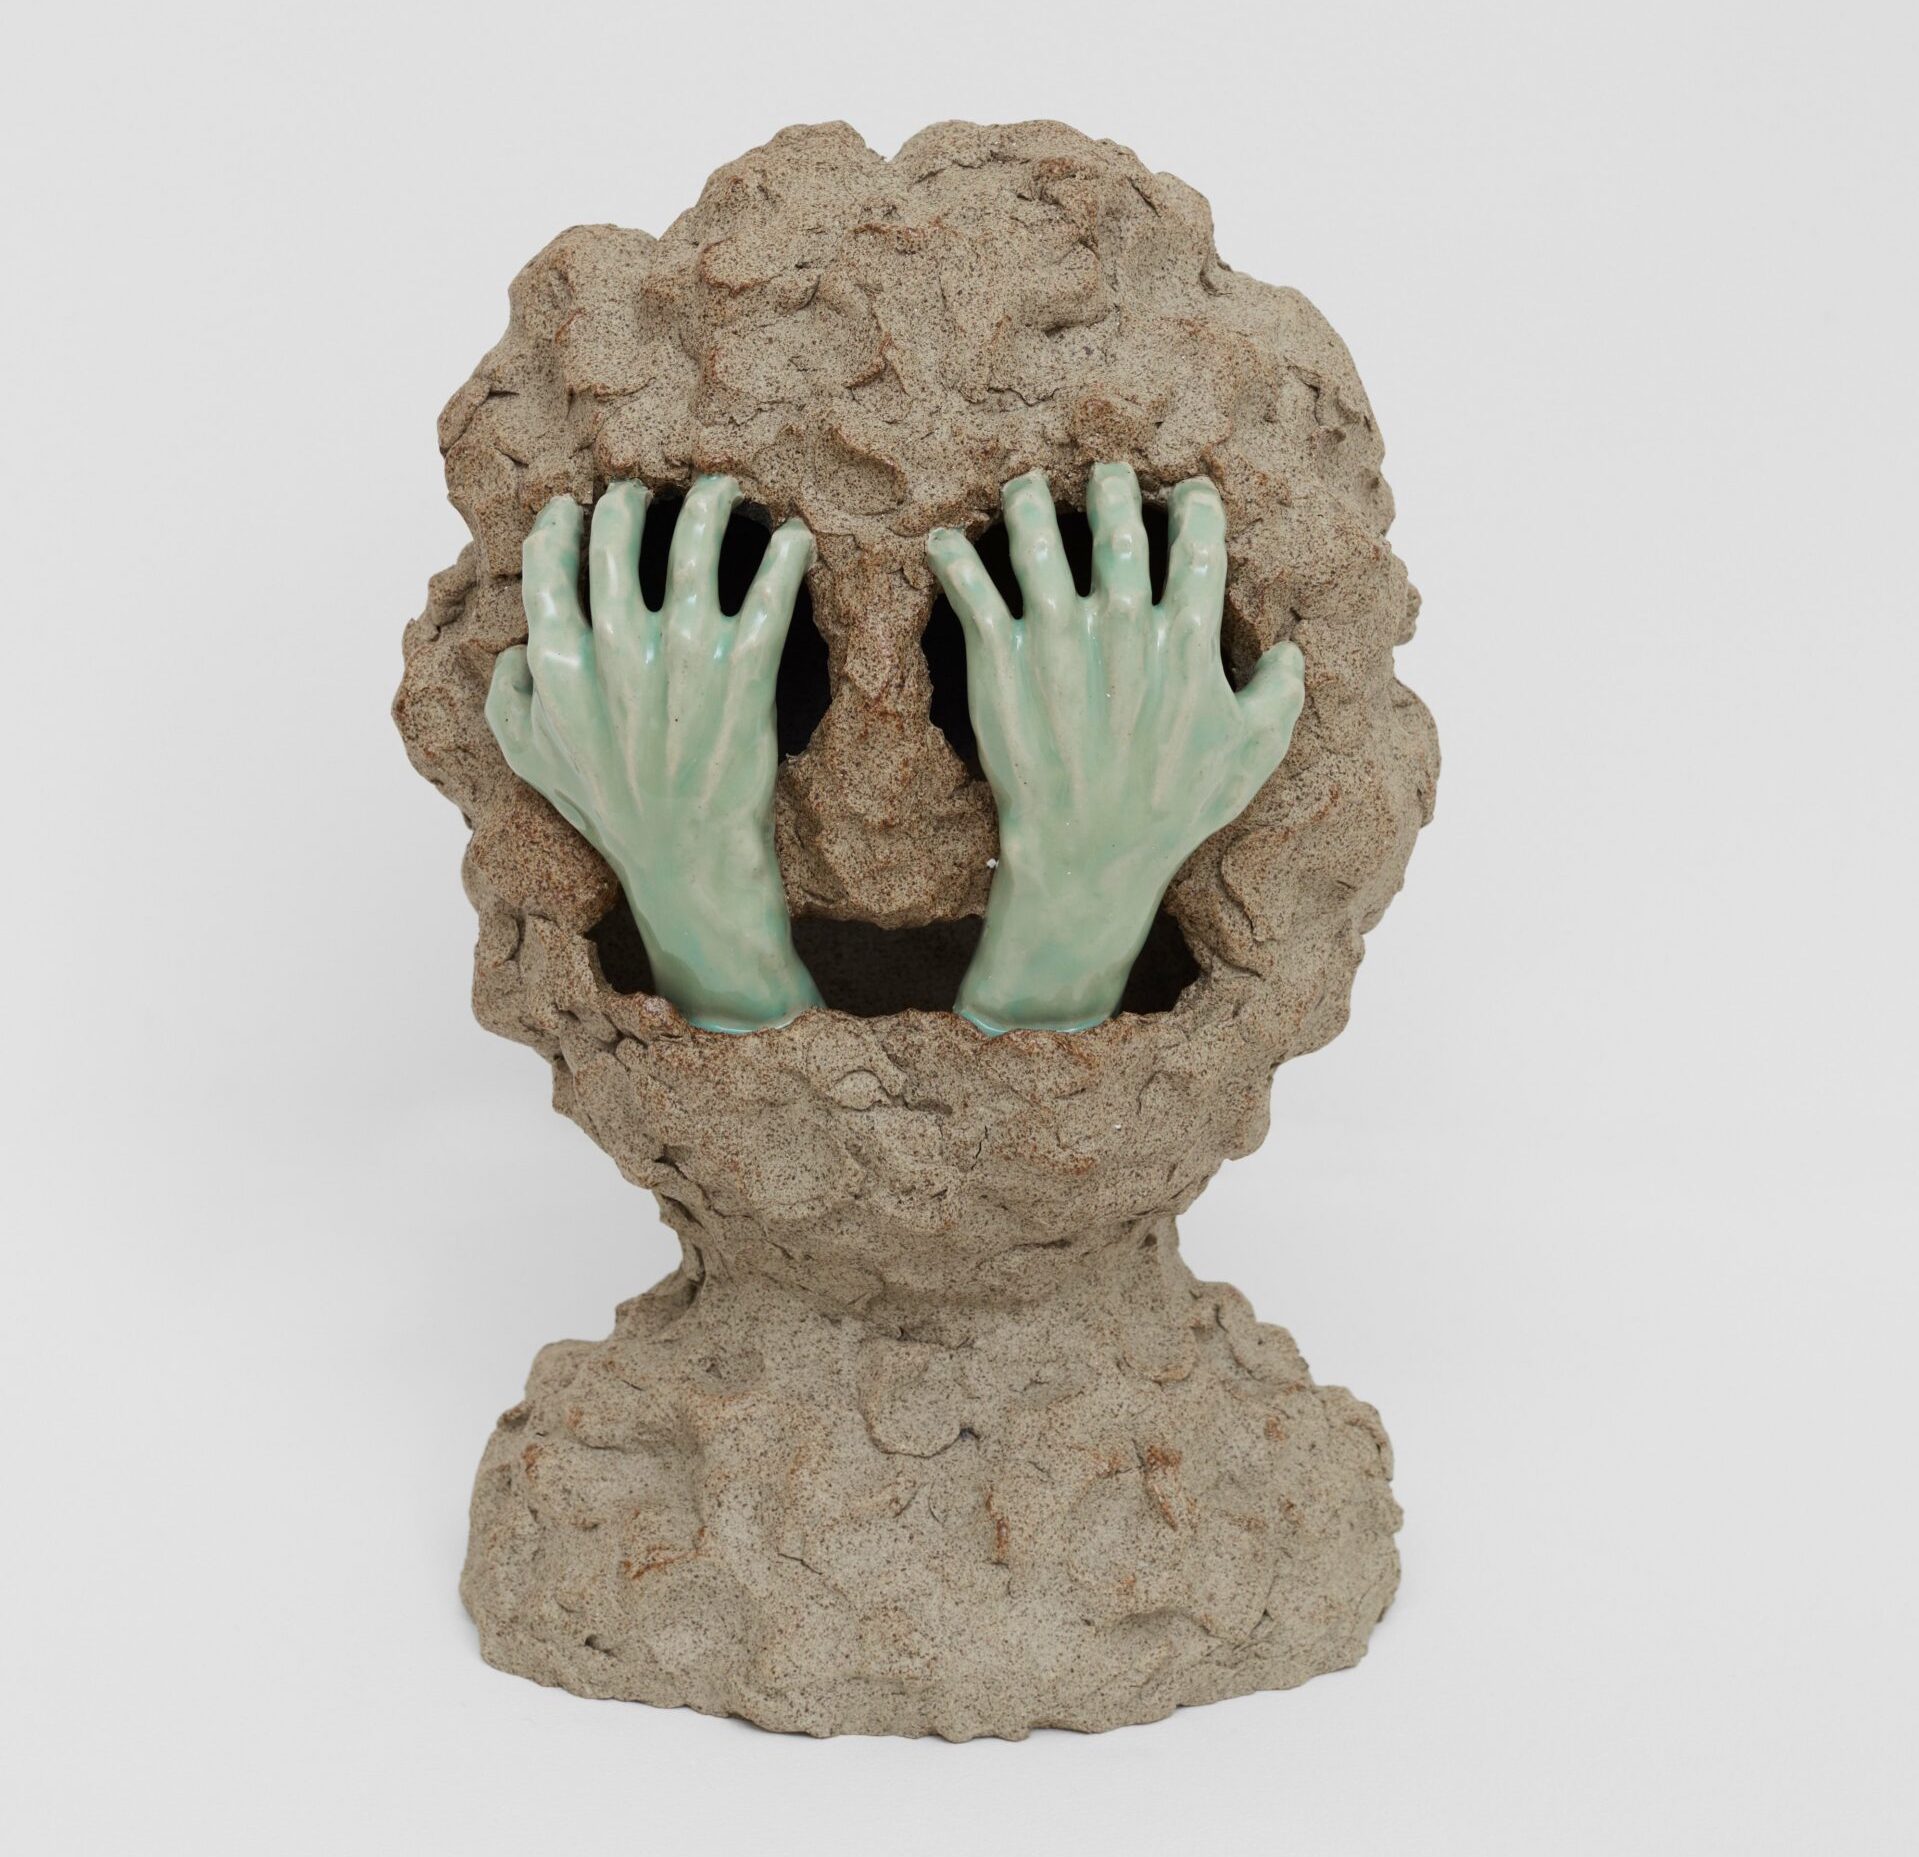 William Cobbing: Grapnel, 2023 | CLAY Festival | Friday 25 August – Sunday 27 August 2023 | National Sculpture Factory | Image: William Cobbing: Grapnel, 2023 – photo of a clay sculpture; we see a very lumpy round clay head, a bit reminiscent of the Cookie Monster, with large deep holes for the round eyes and a wide horizontal mouth; from the mouth emerges a pair of realistic hands glazed pale green on white; the hands, presumably from the same hidden body, look as though they are clawing at the eyes / eye sockets 